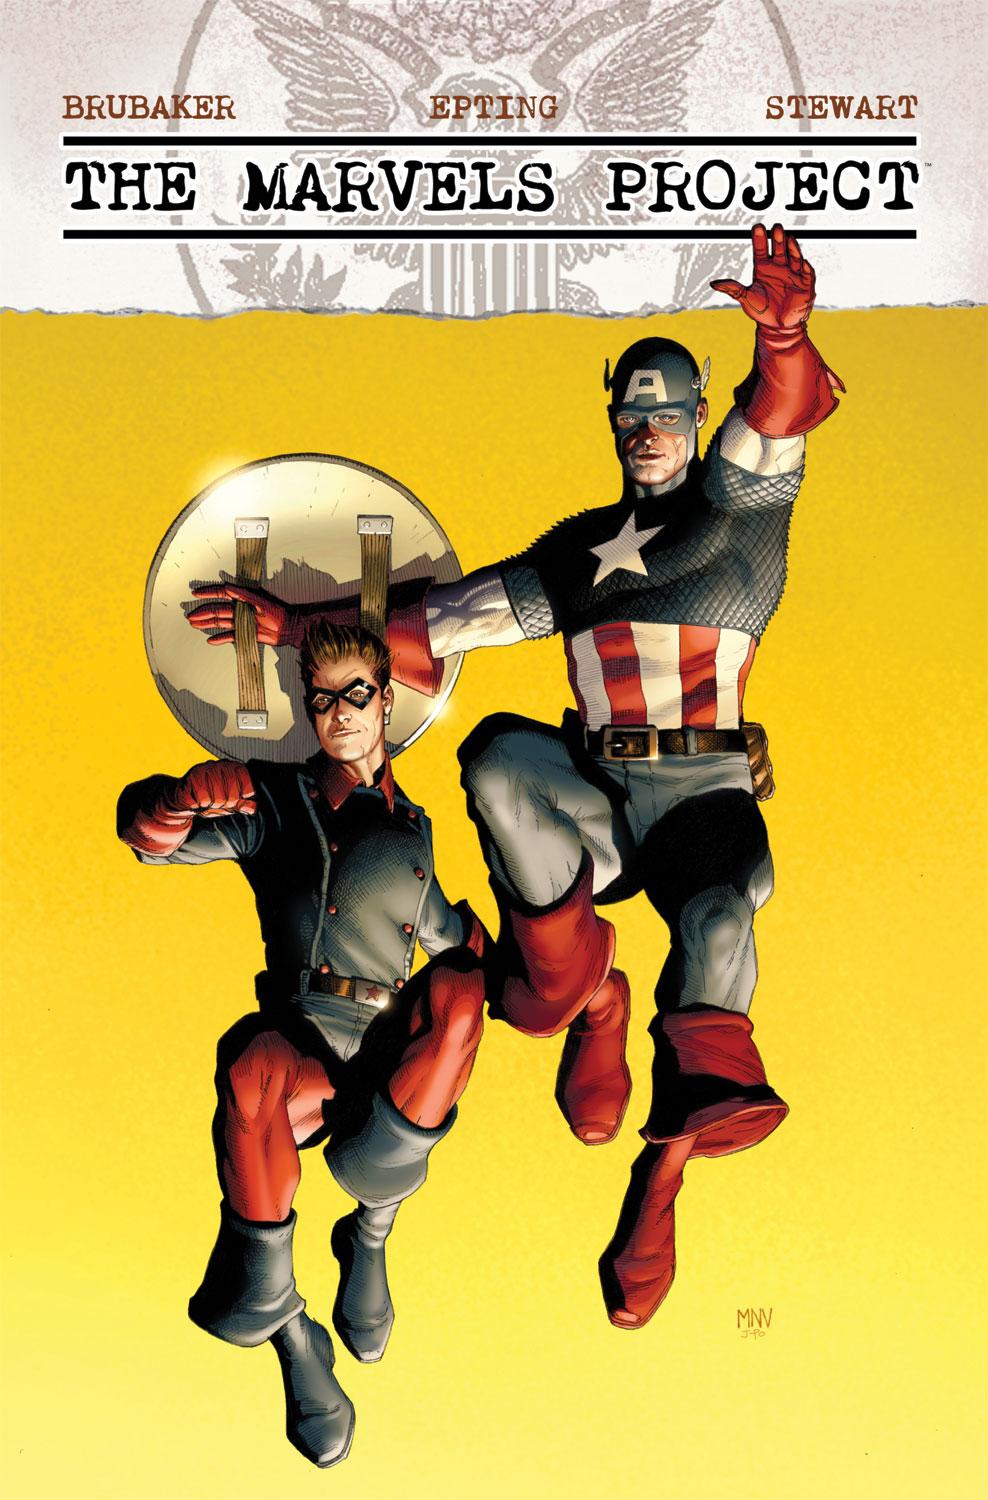 The Marvels Project (2009) #7